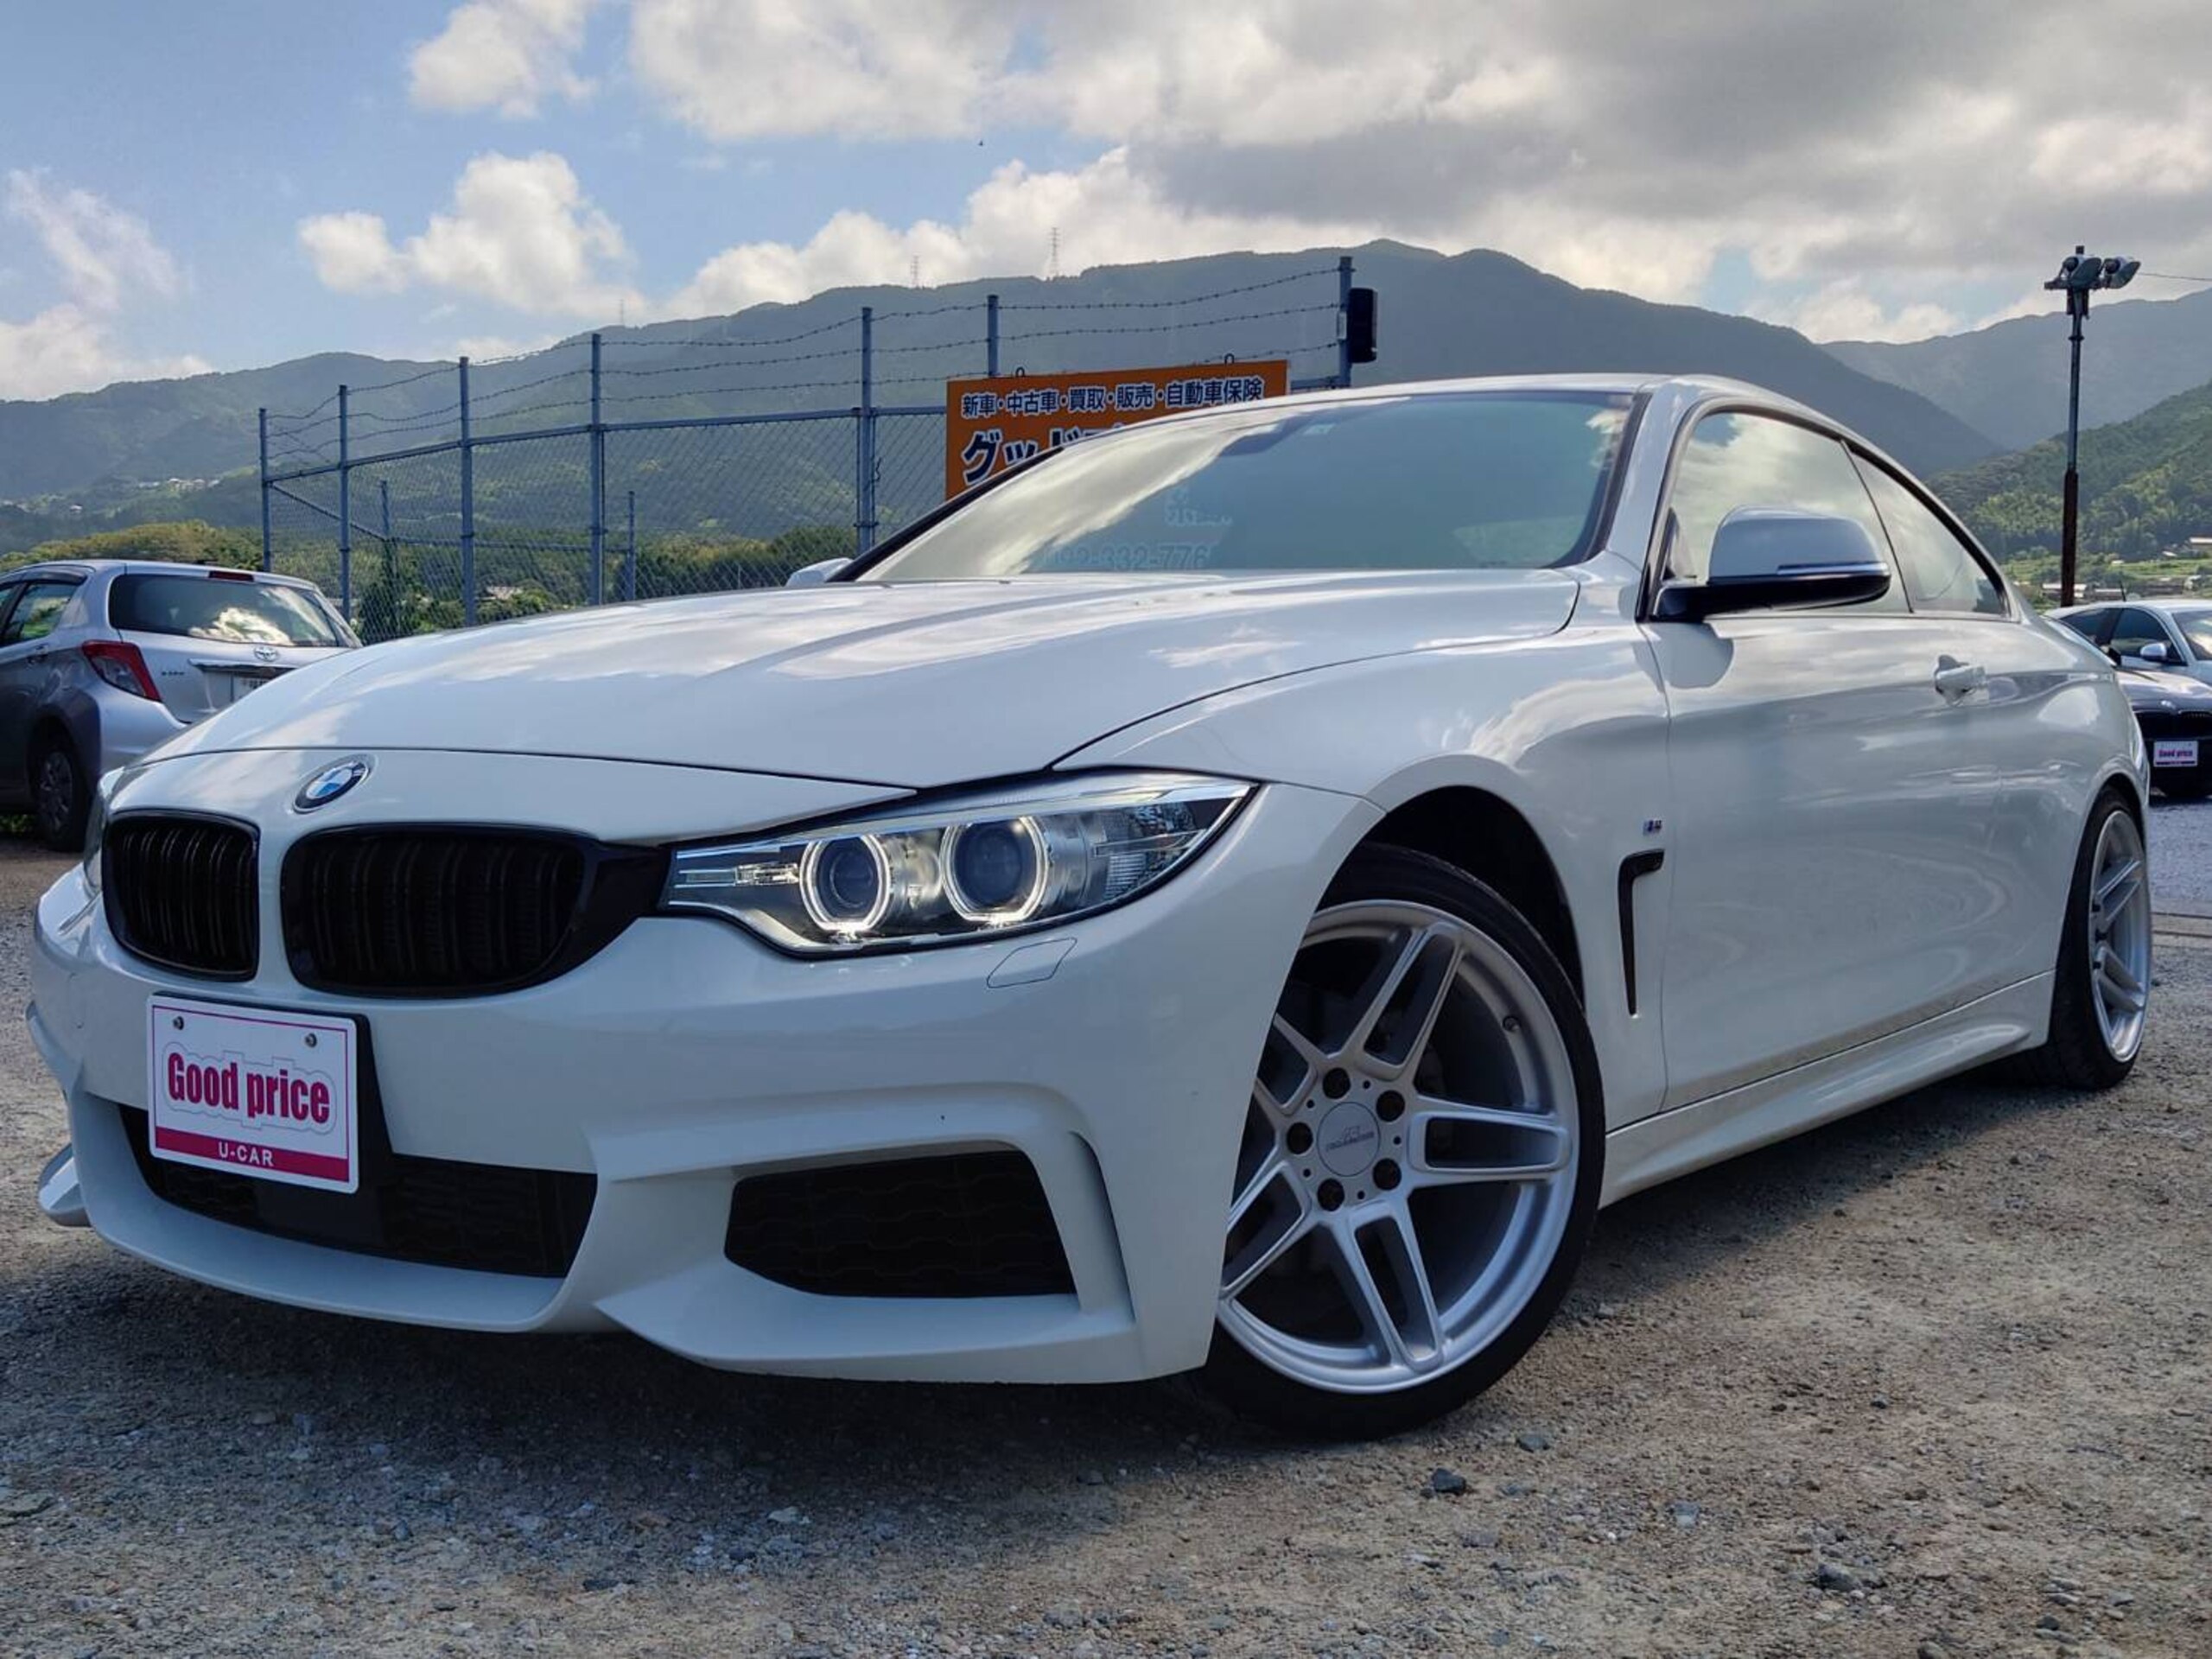 The BMW F32 435i is a Luxury Sports Coupe BARGAIN! 